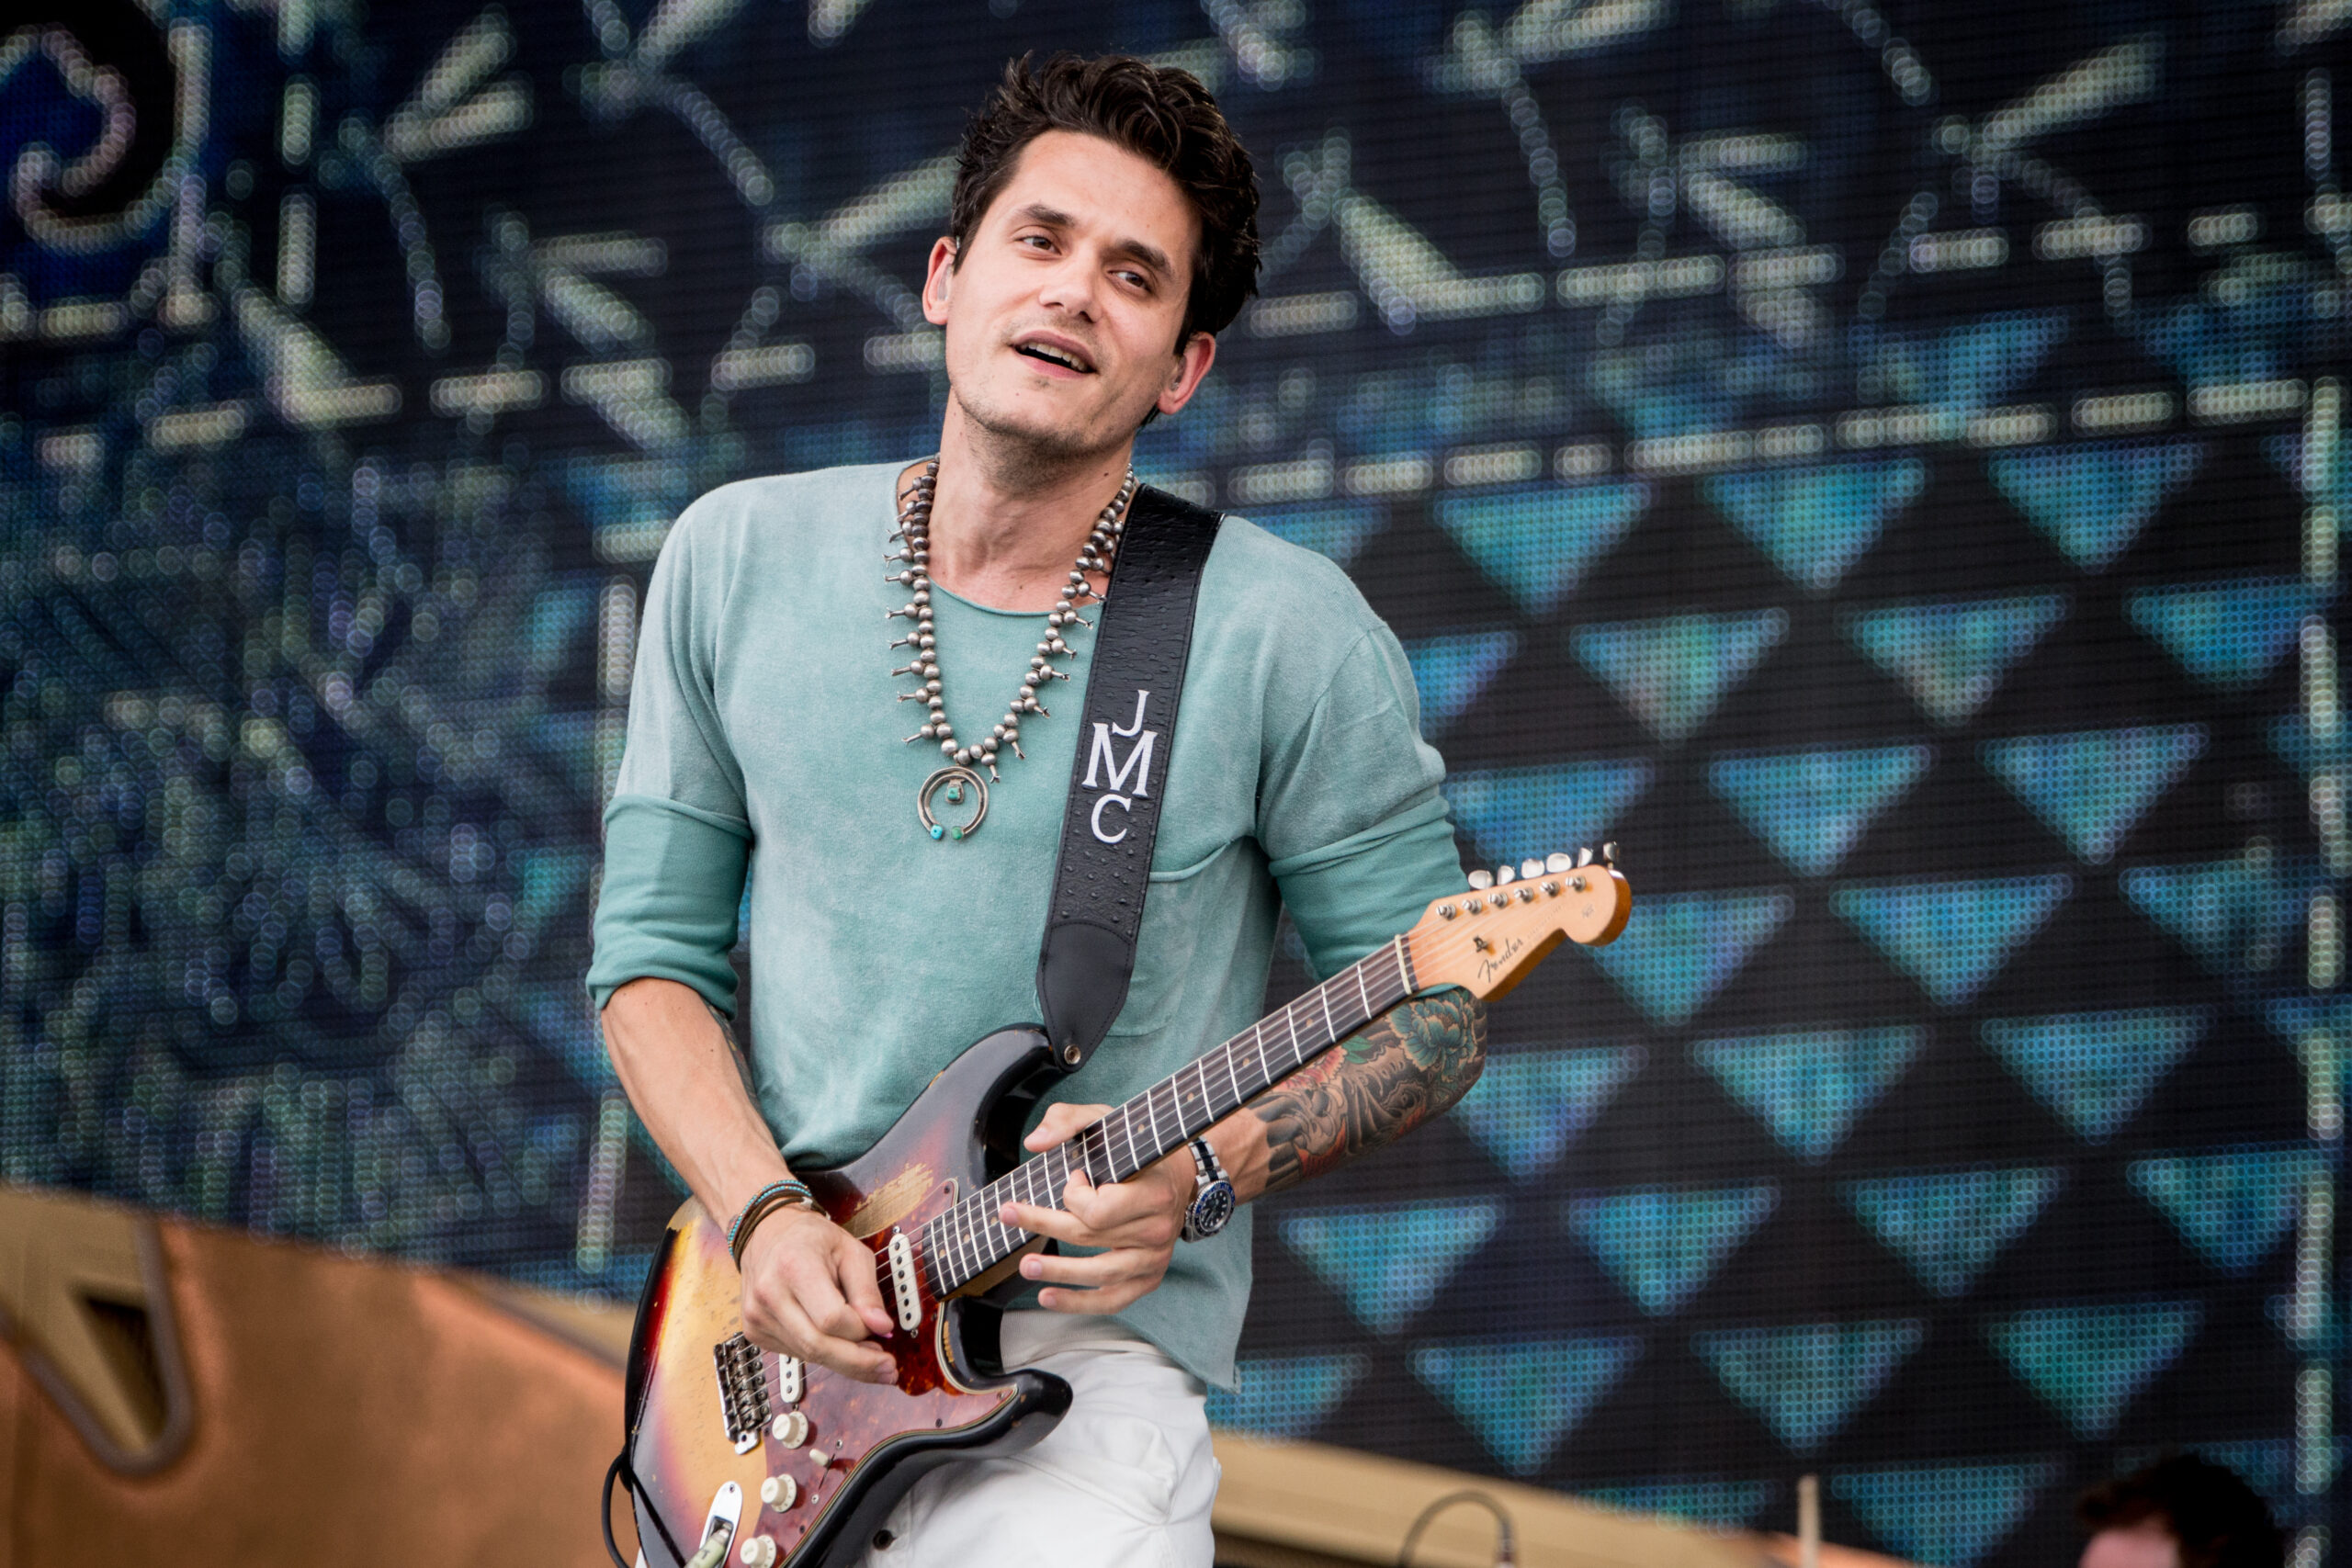 <p>John Mayer’s 2022 Tour supported his eighth album, Sob Rock. It spanned from February to April 2022 and earned the award-winning singer and producer $51.8 million from 32 shows. Ticket prices began at $49.50, but some soared to a hefty $500 per person, making this tour one of the most famous concert experiences in recent times.</p>